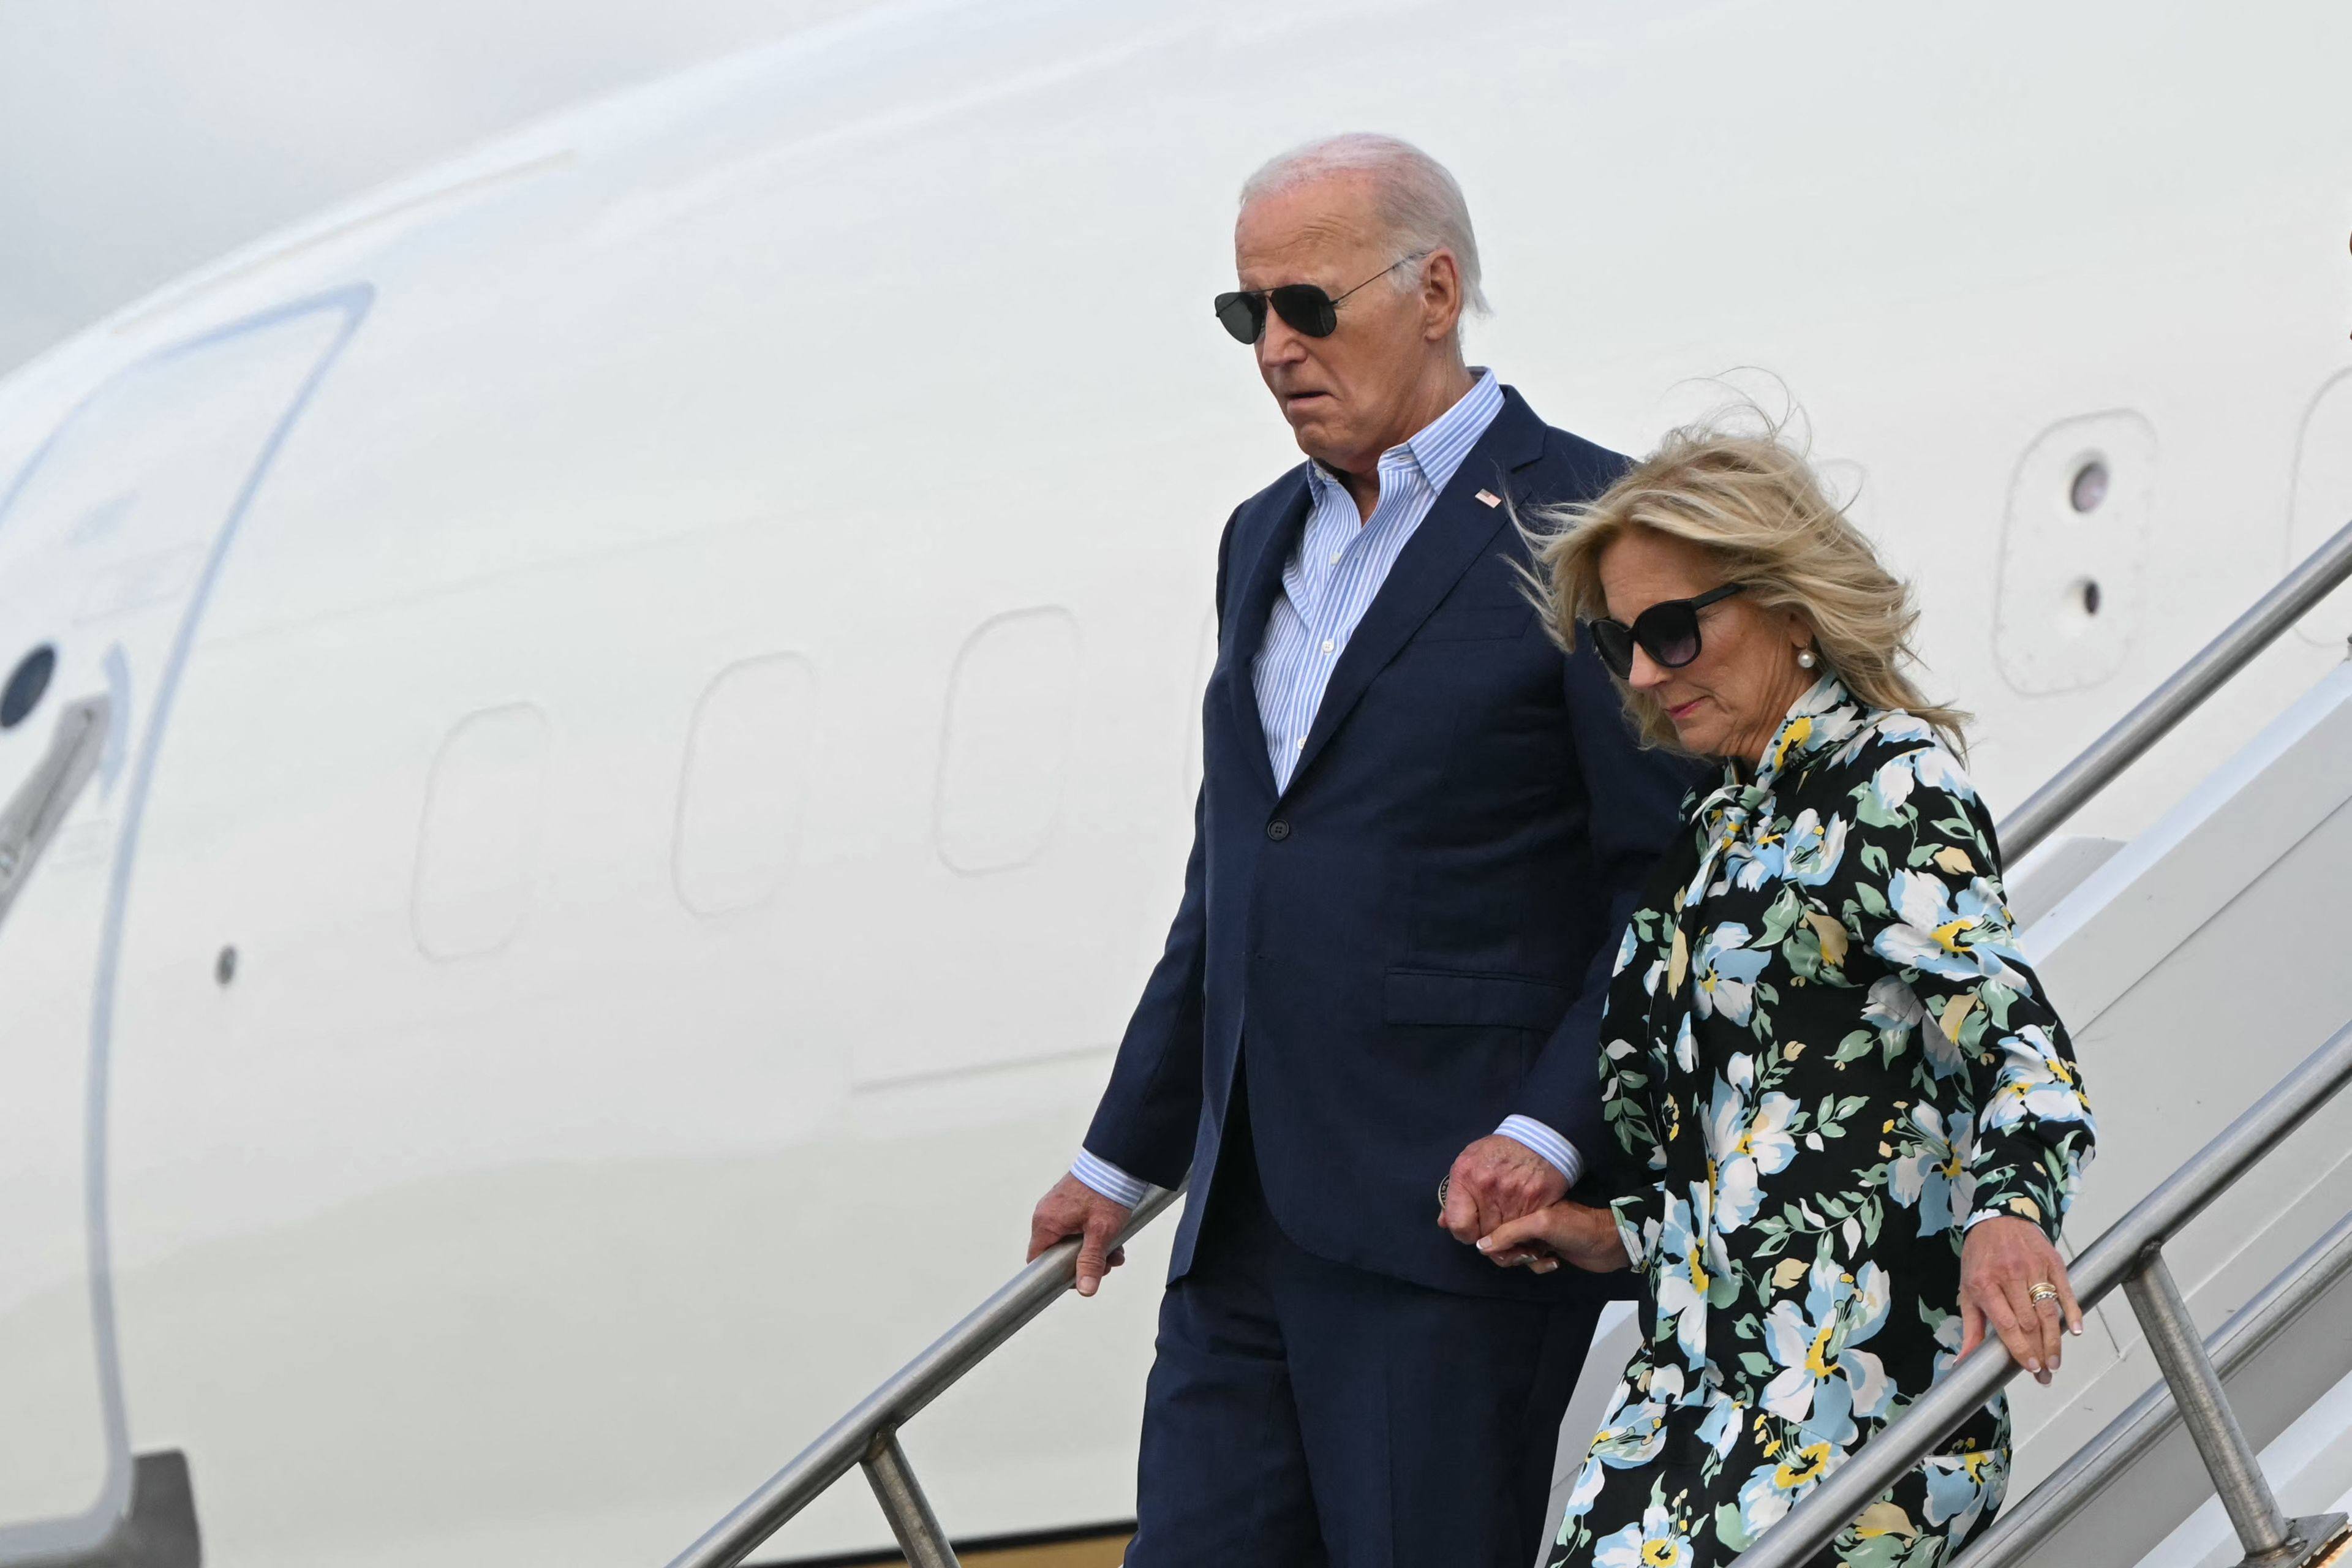 US President Joe Biden and First Lady Jill Biden step off Air Force One upon arrival at McGuire Air Force Base in New Jersey on June 29. The next president should be able to work with peer nations like China to deal with severe problems that will arise in the second half of the 2020s. Photo: AFP